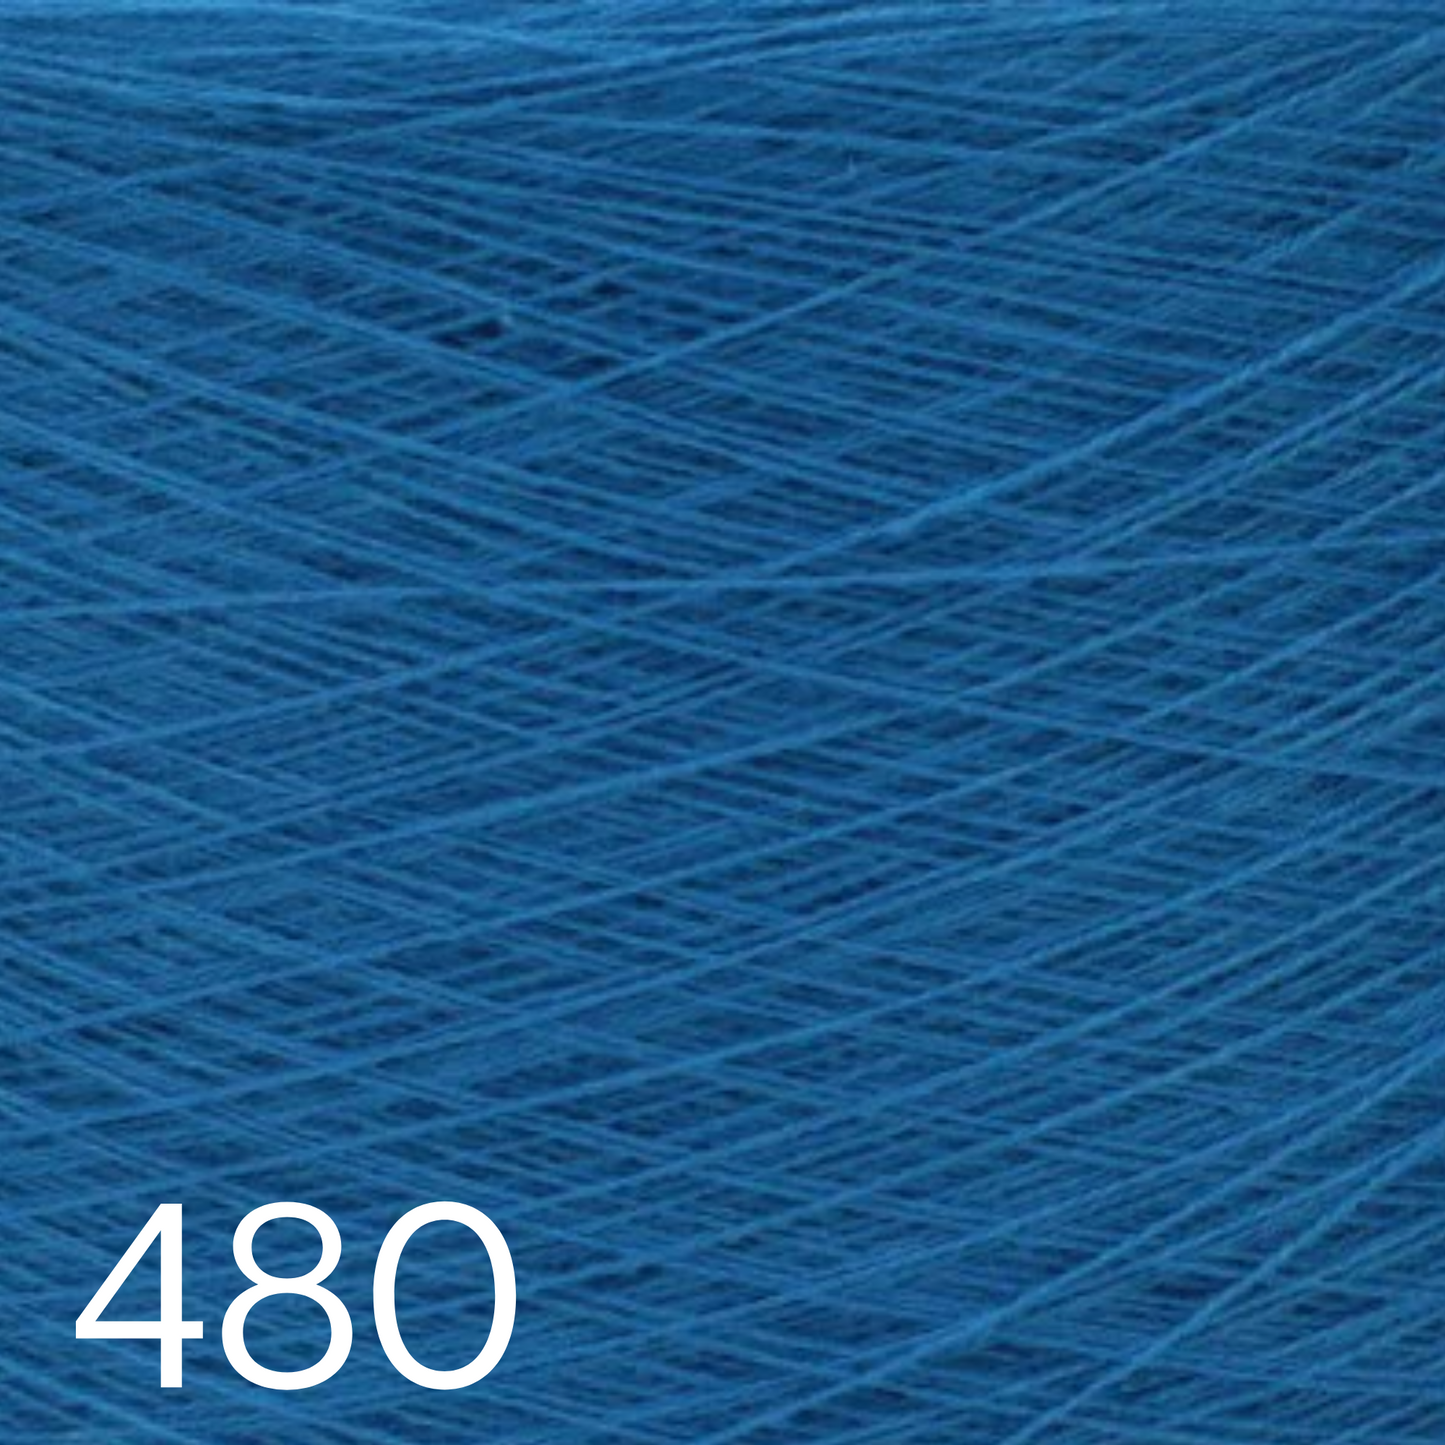 480 - Solid Colour Yarn Cake